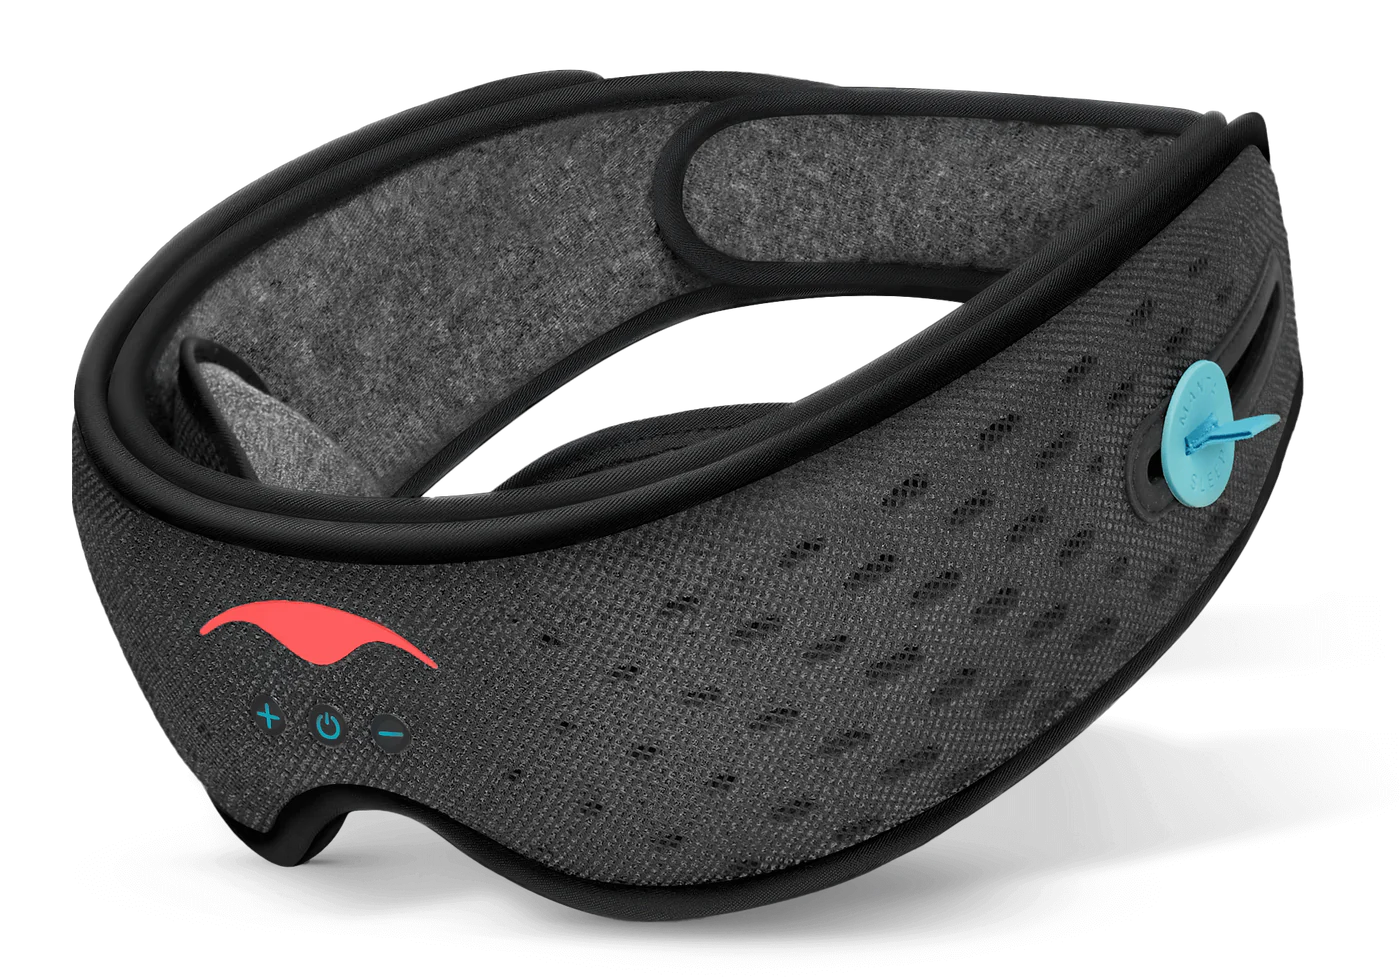 A black mesh sleep mask with headphones for snoozing at the best nap length.